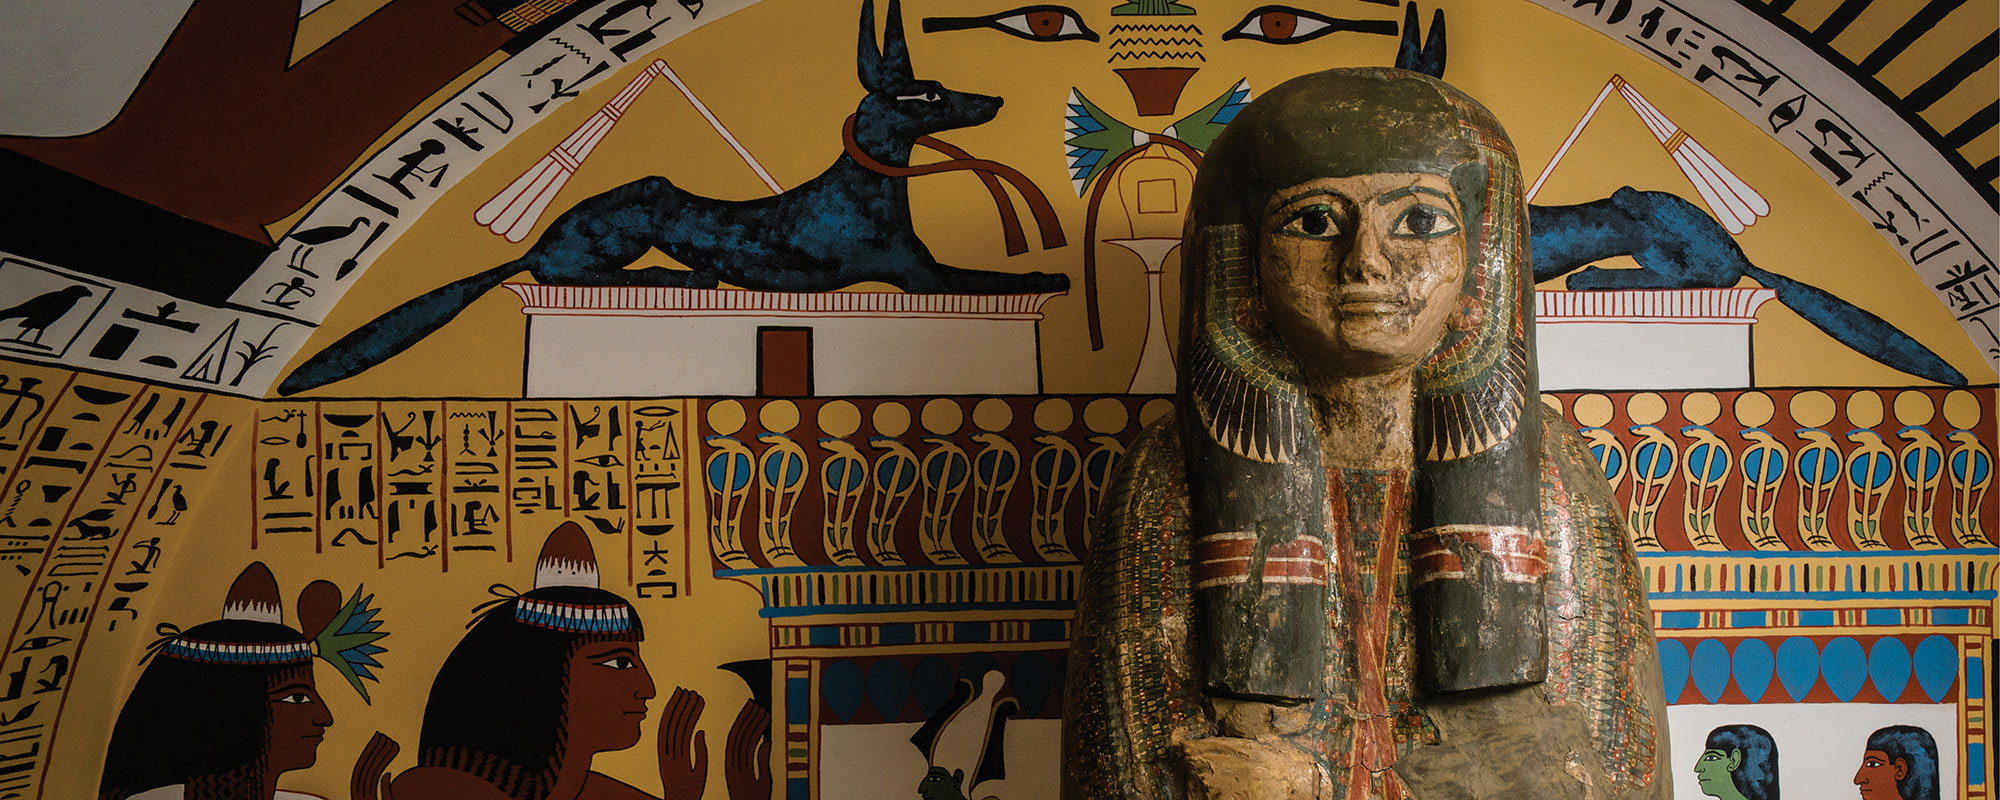 A view of an egyptian mummy in an exhibit.